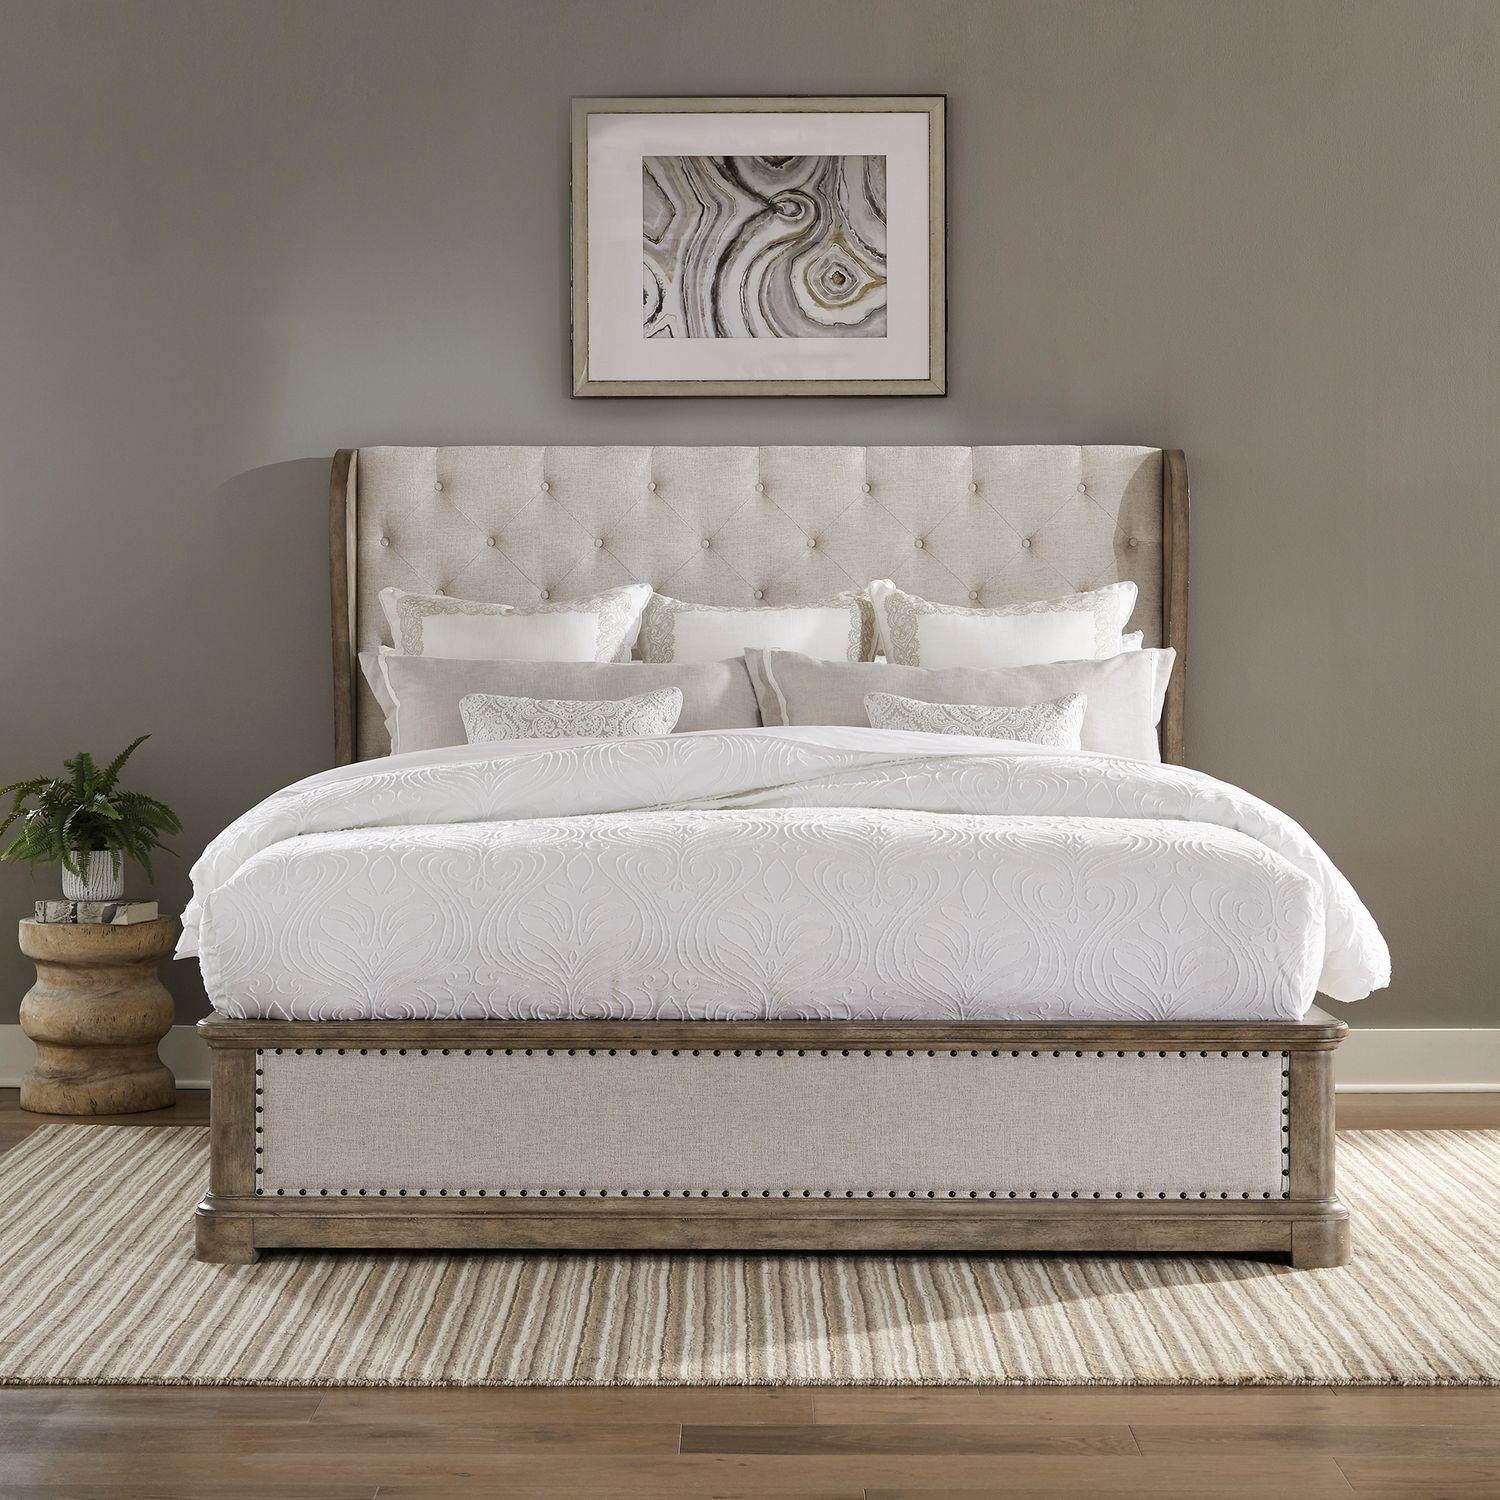 Transitional Platform Bed Town & Country (711-BR) 711-BR-KSH in Taupe Linen